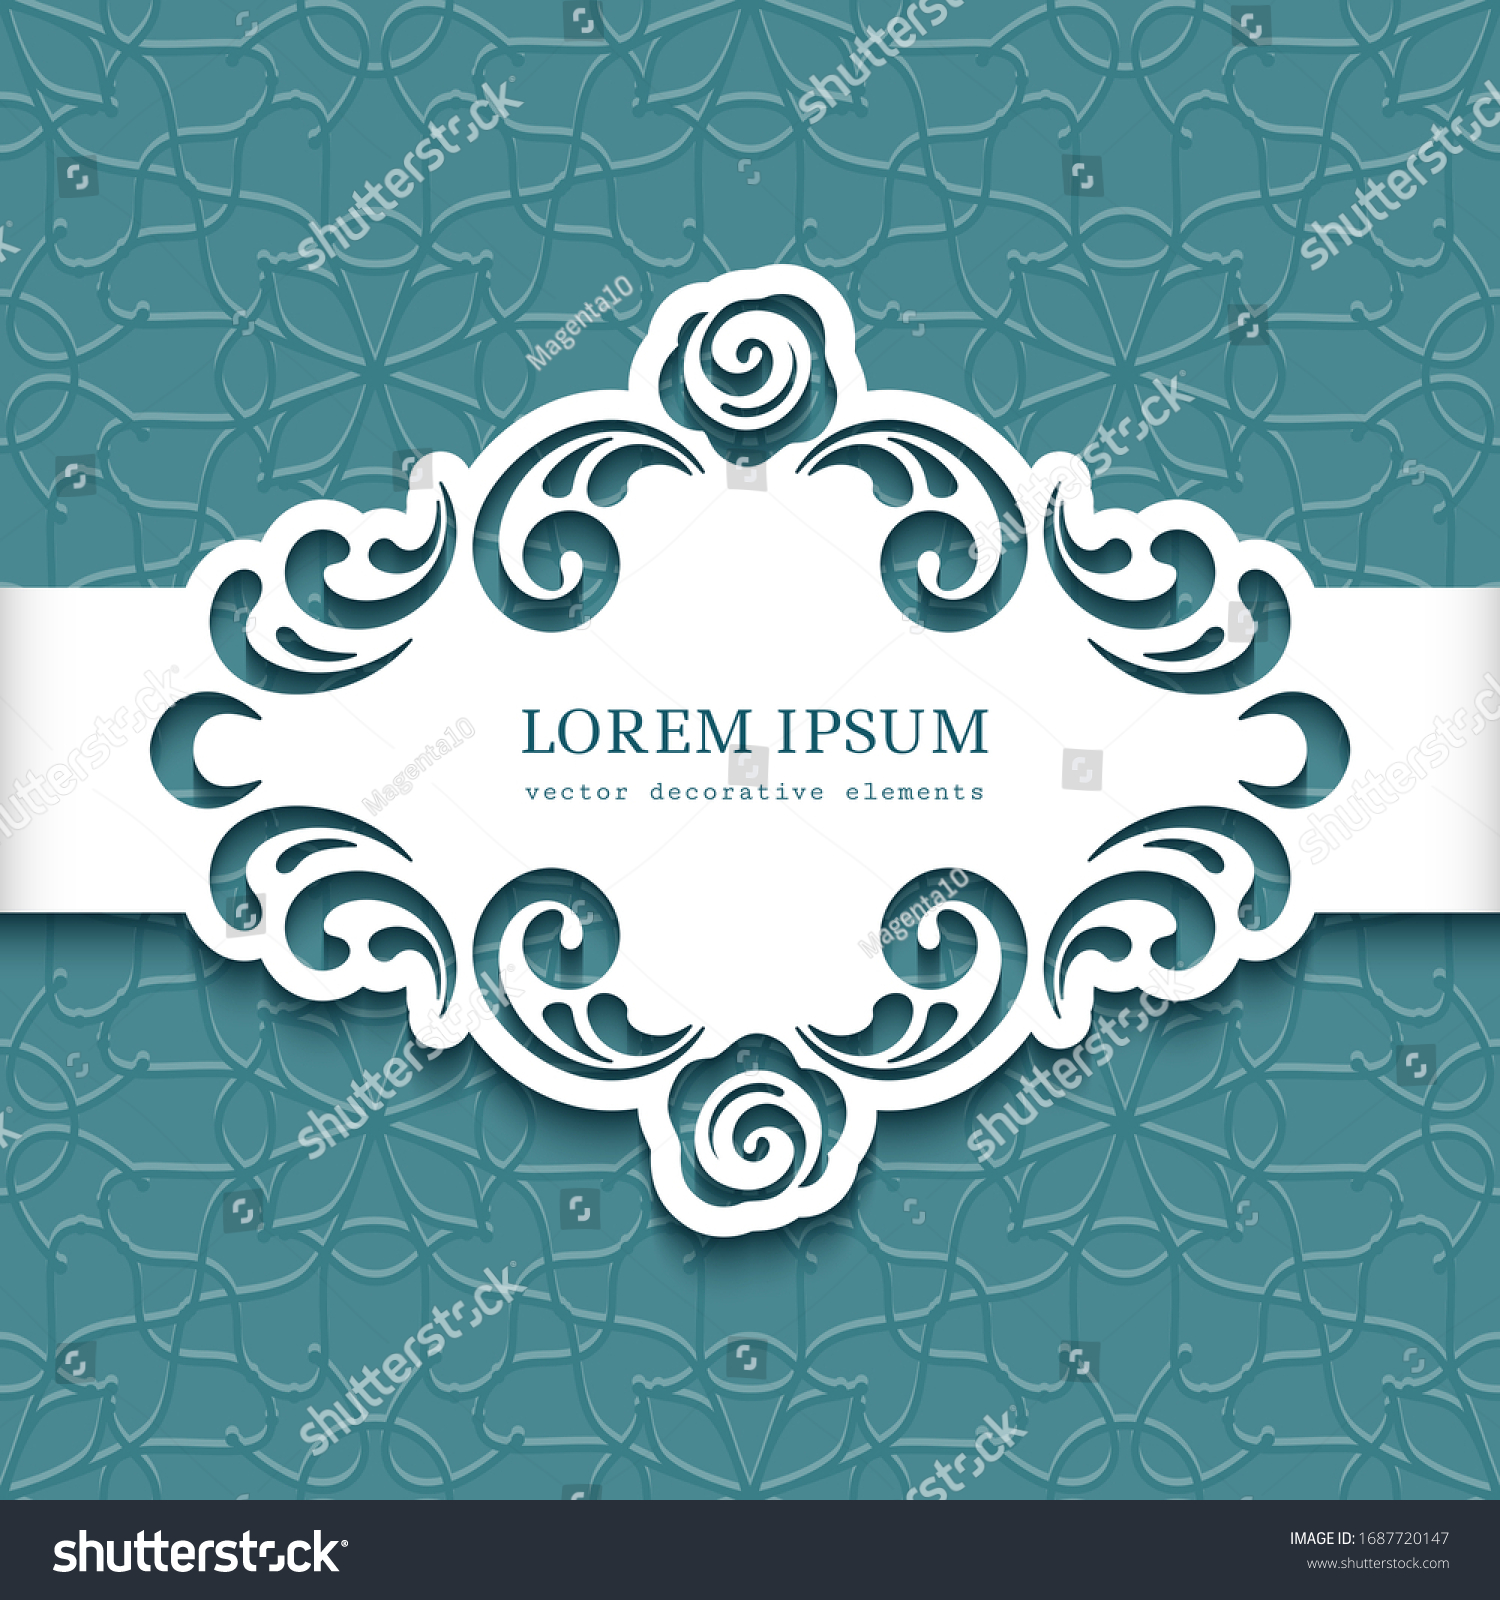 SVG of Cutout paper frame with floral swirl pattern on textured background. Belly band decoration. 
Vintage template for laser cutting. Vector ornament for wedding invitation card design. Place for text svg